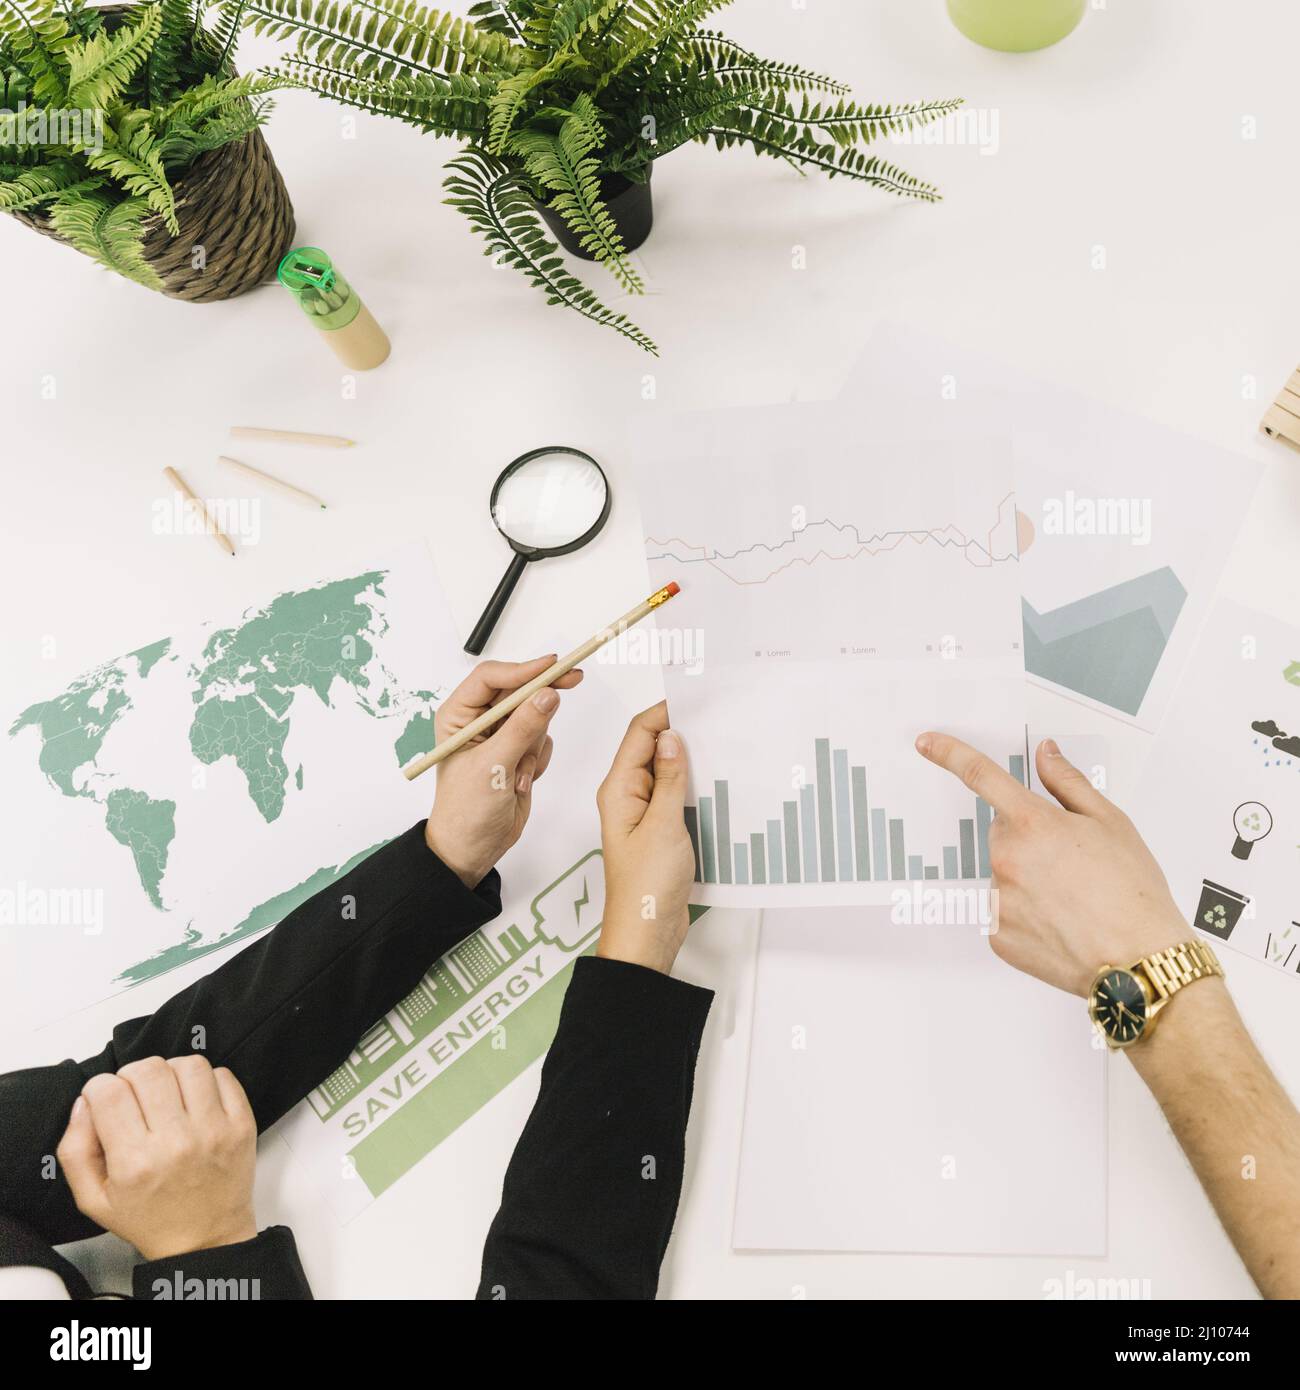 Elevated view businesspeople analyzing graph desk Stock Photo